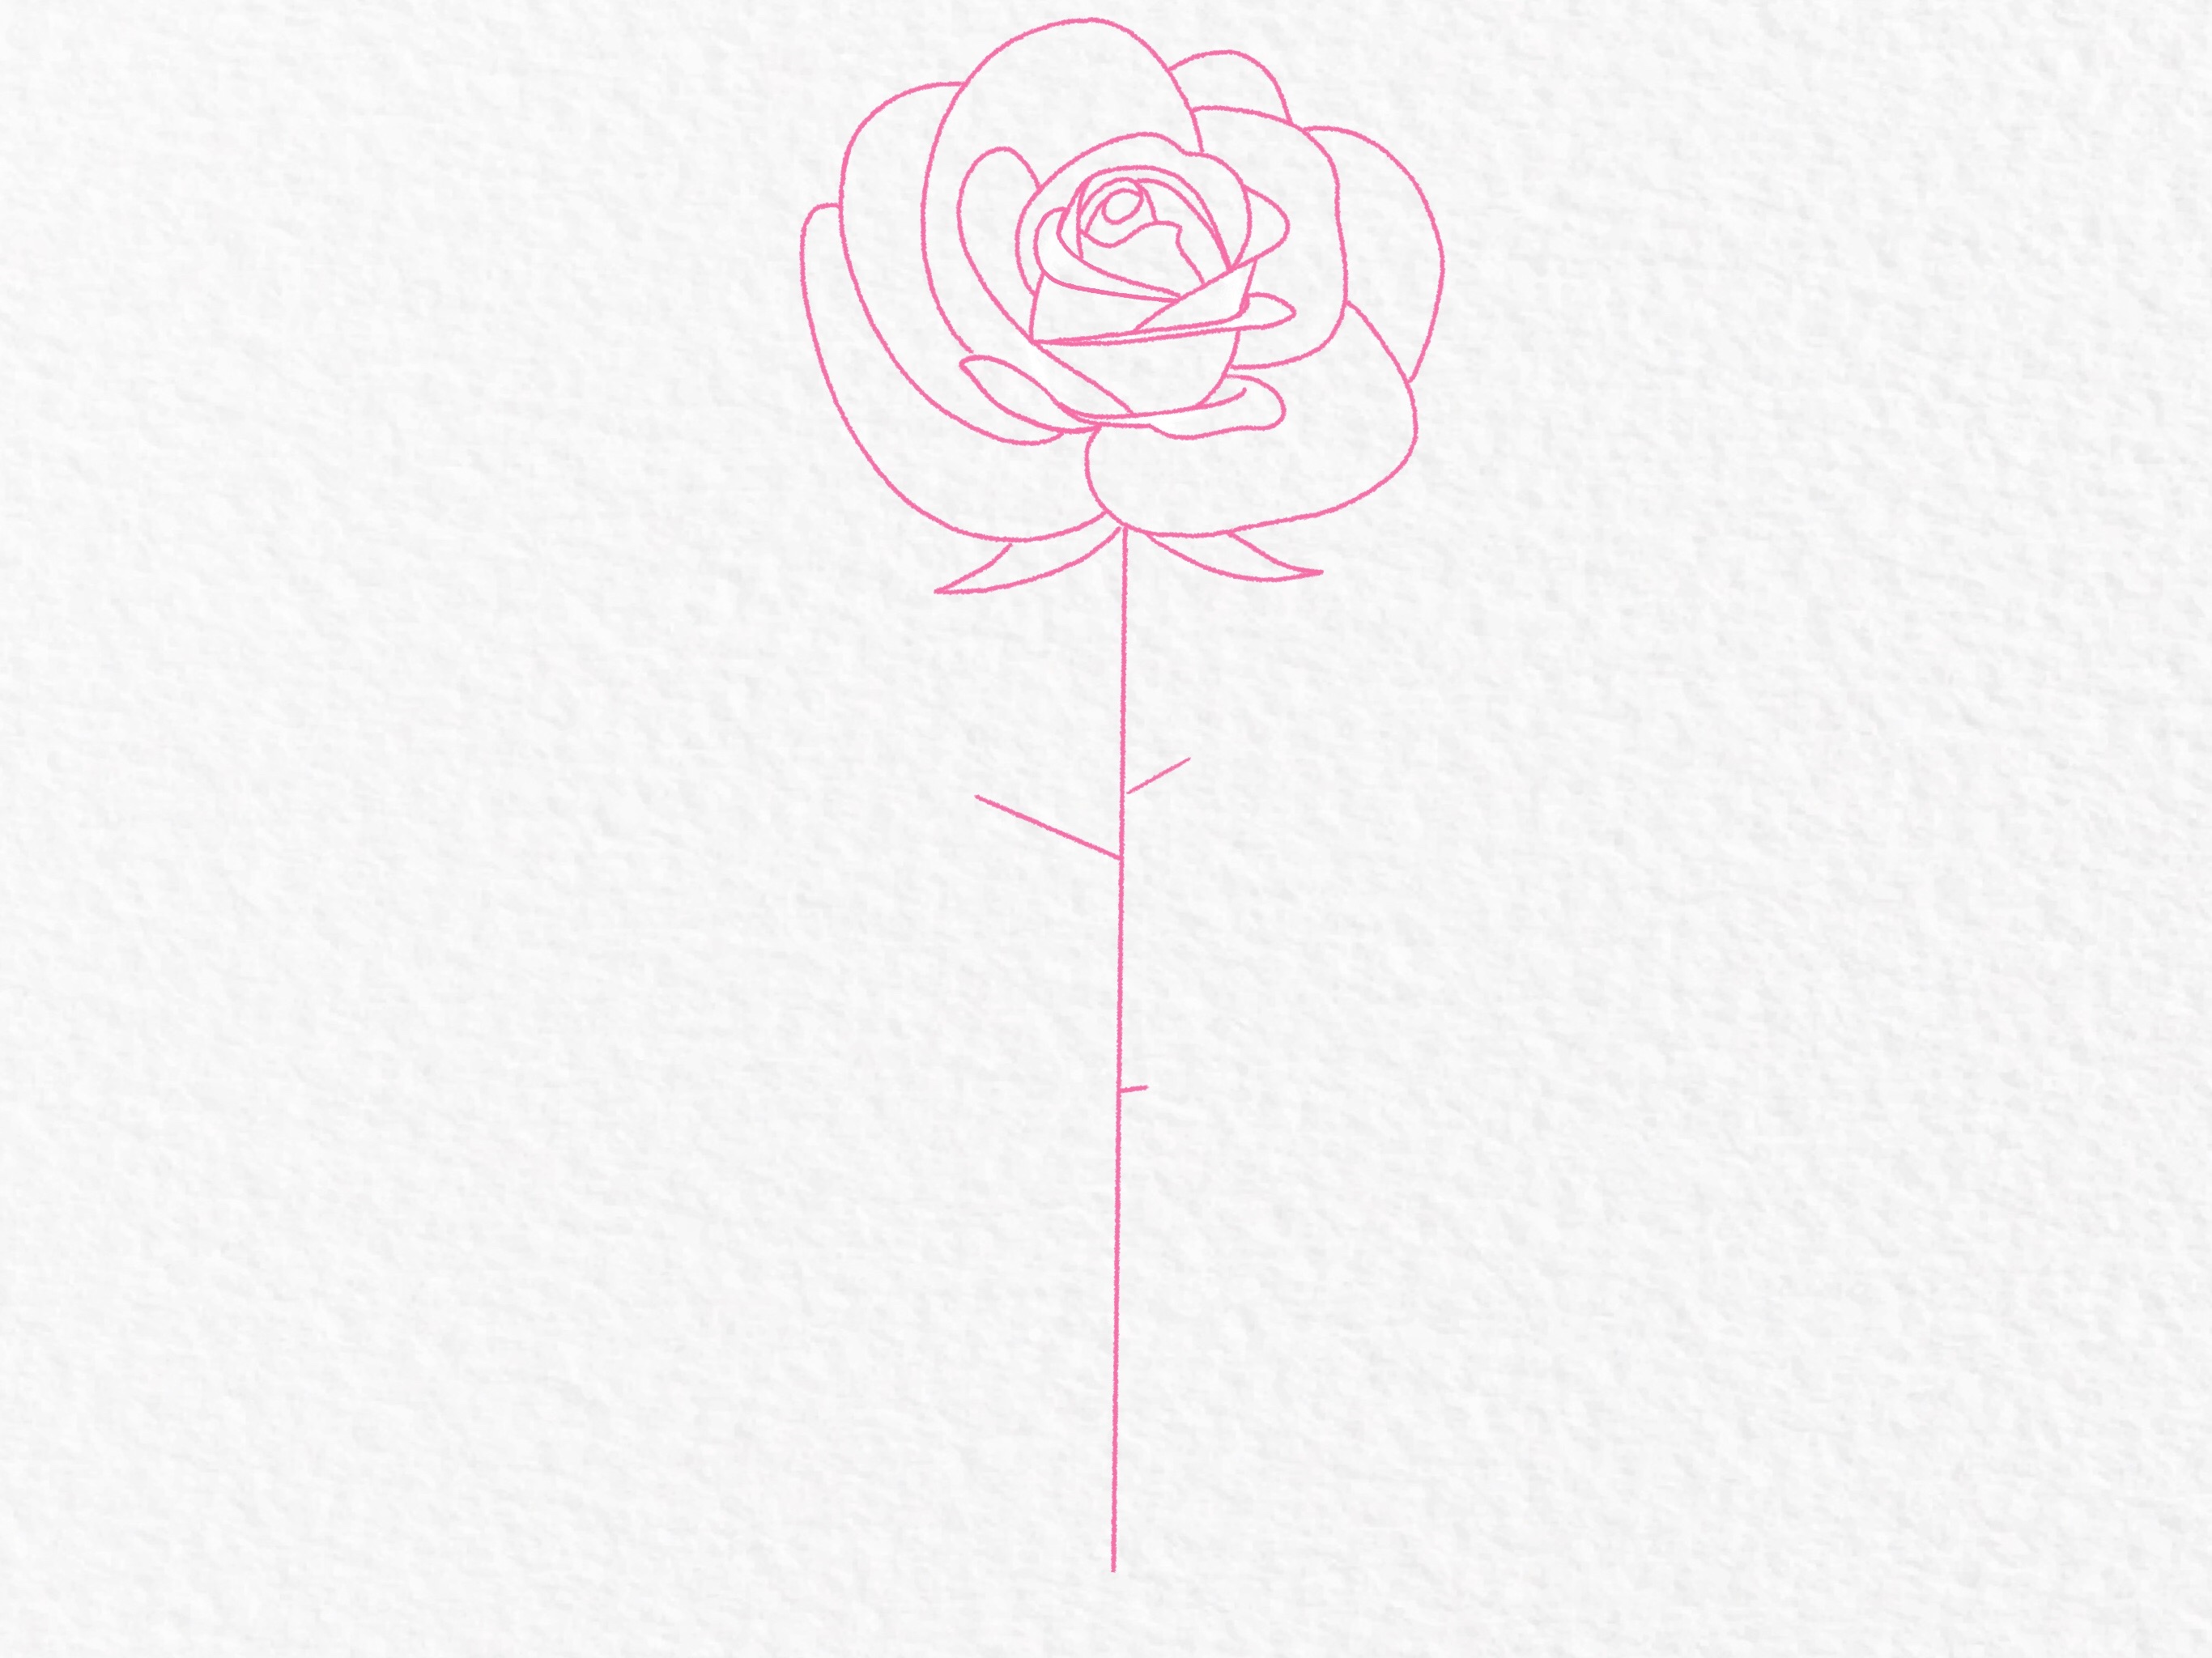 How to draw a rose, step by step drawing tutorial - step 21